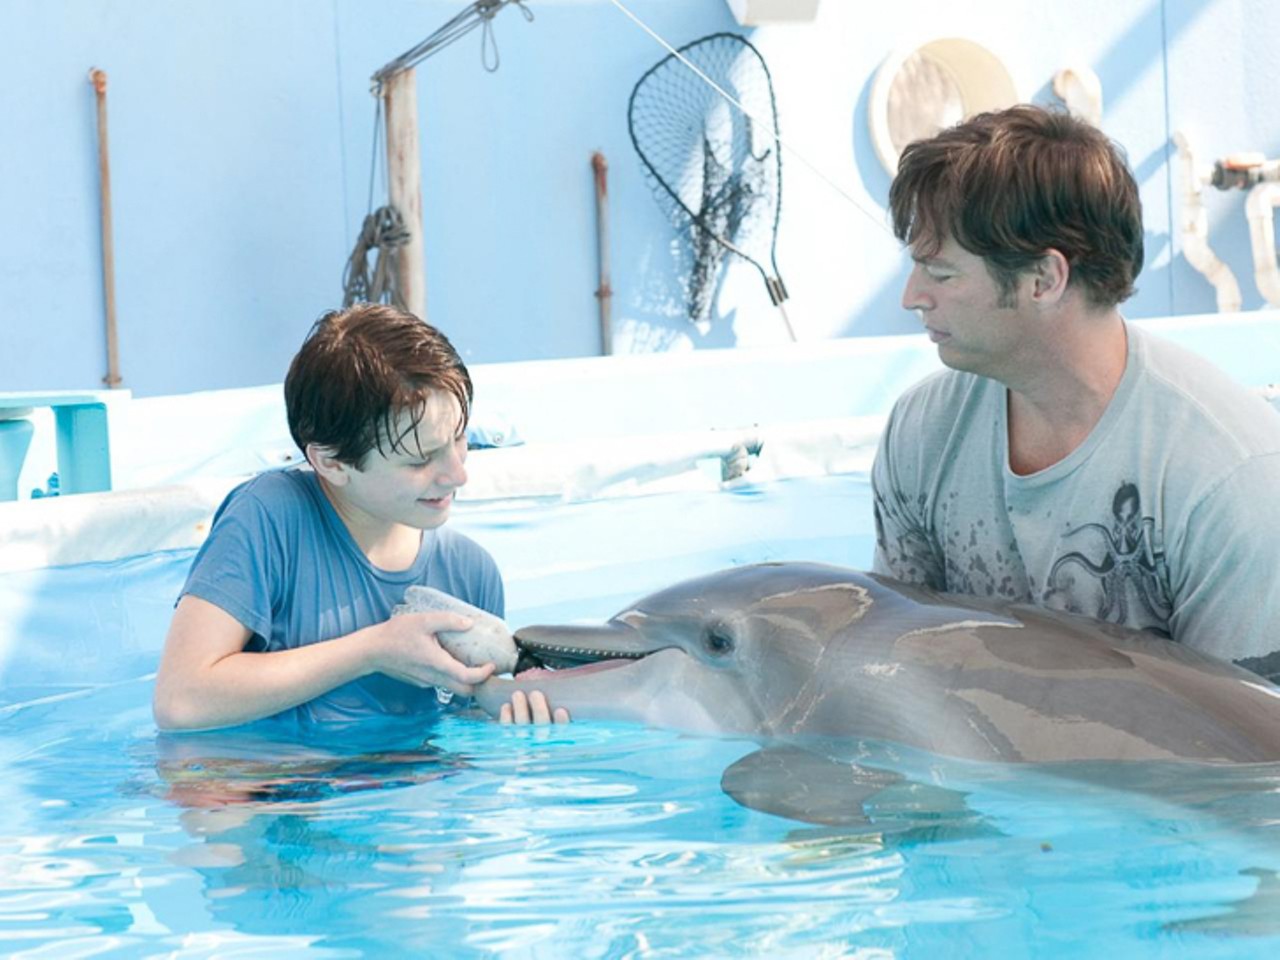 Dolphin Tale 1 and 2 (2010, 2014)
Location: Clearwater, St. Petersburg, and Tarpon Springs
Inspired by true events, Dolphin Tale documents the tale of Winter and her prosthetic tale. Dolphin Tale 2 Winter&#146;s mother and tankmate, Panama, dies&#151;leaving her without a tankmate. By law, dolphins cannot live in a tank alone, and the Mote Aquarium is on a race against the clock to find Winter a new partner in crime.
Both movies are streaming on Amazon Prime, YouTube, iTunes, Google Play, and Vudu. Dolphin Tale 2 is also available on Netflix.
Photo via Alcon Entertainment